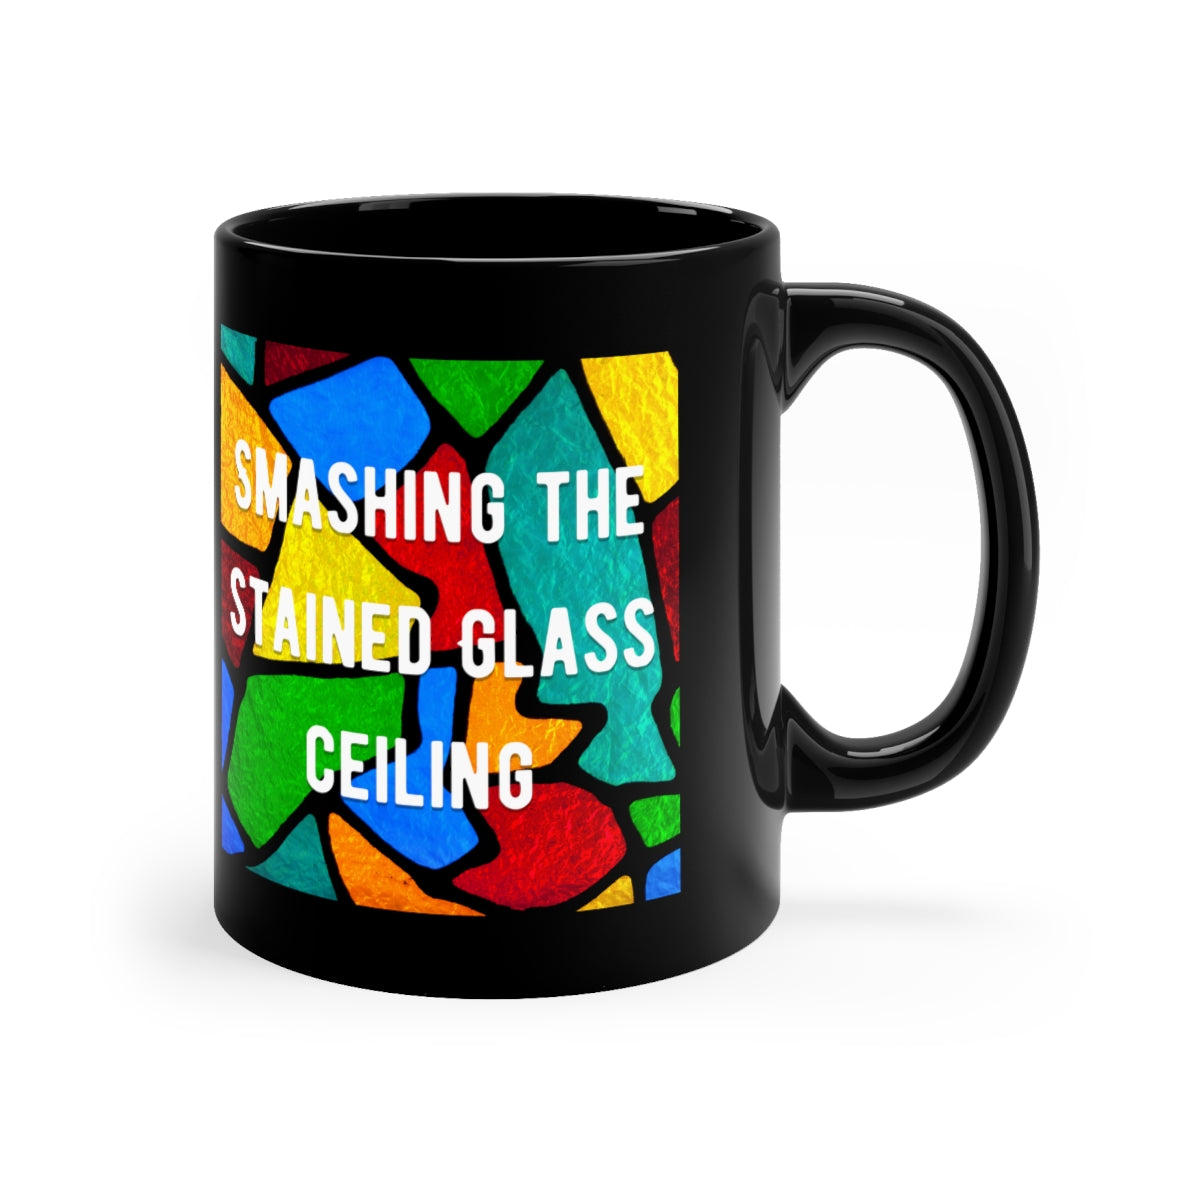 Smashing the Stained Glass Ceiling 11oz Black Mug Gift for Pastor gift for deacon gift for clergy gift pastor appreciation clergywoman gift